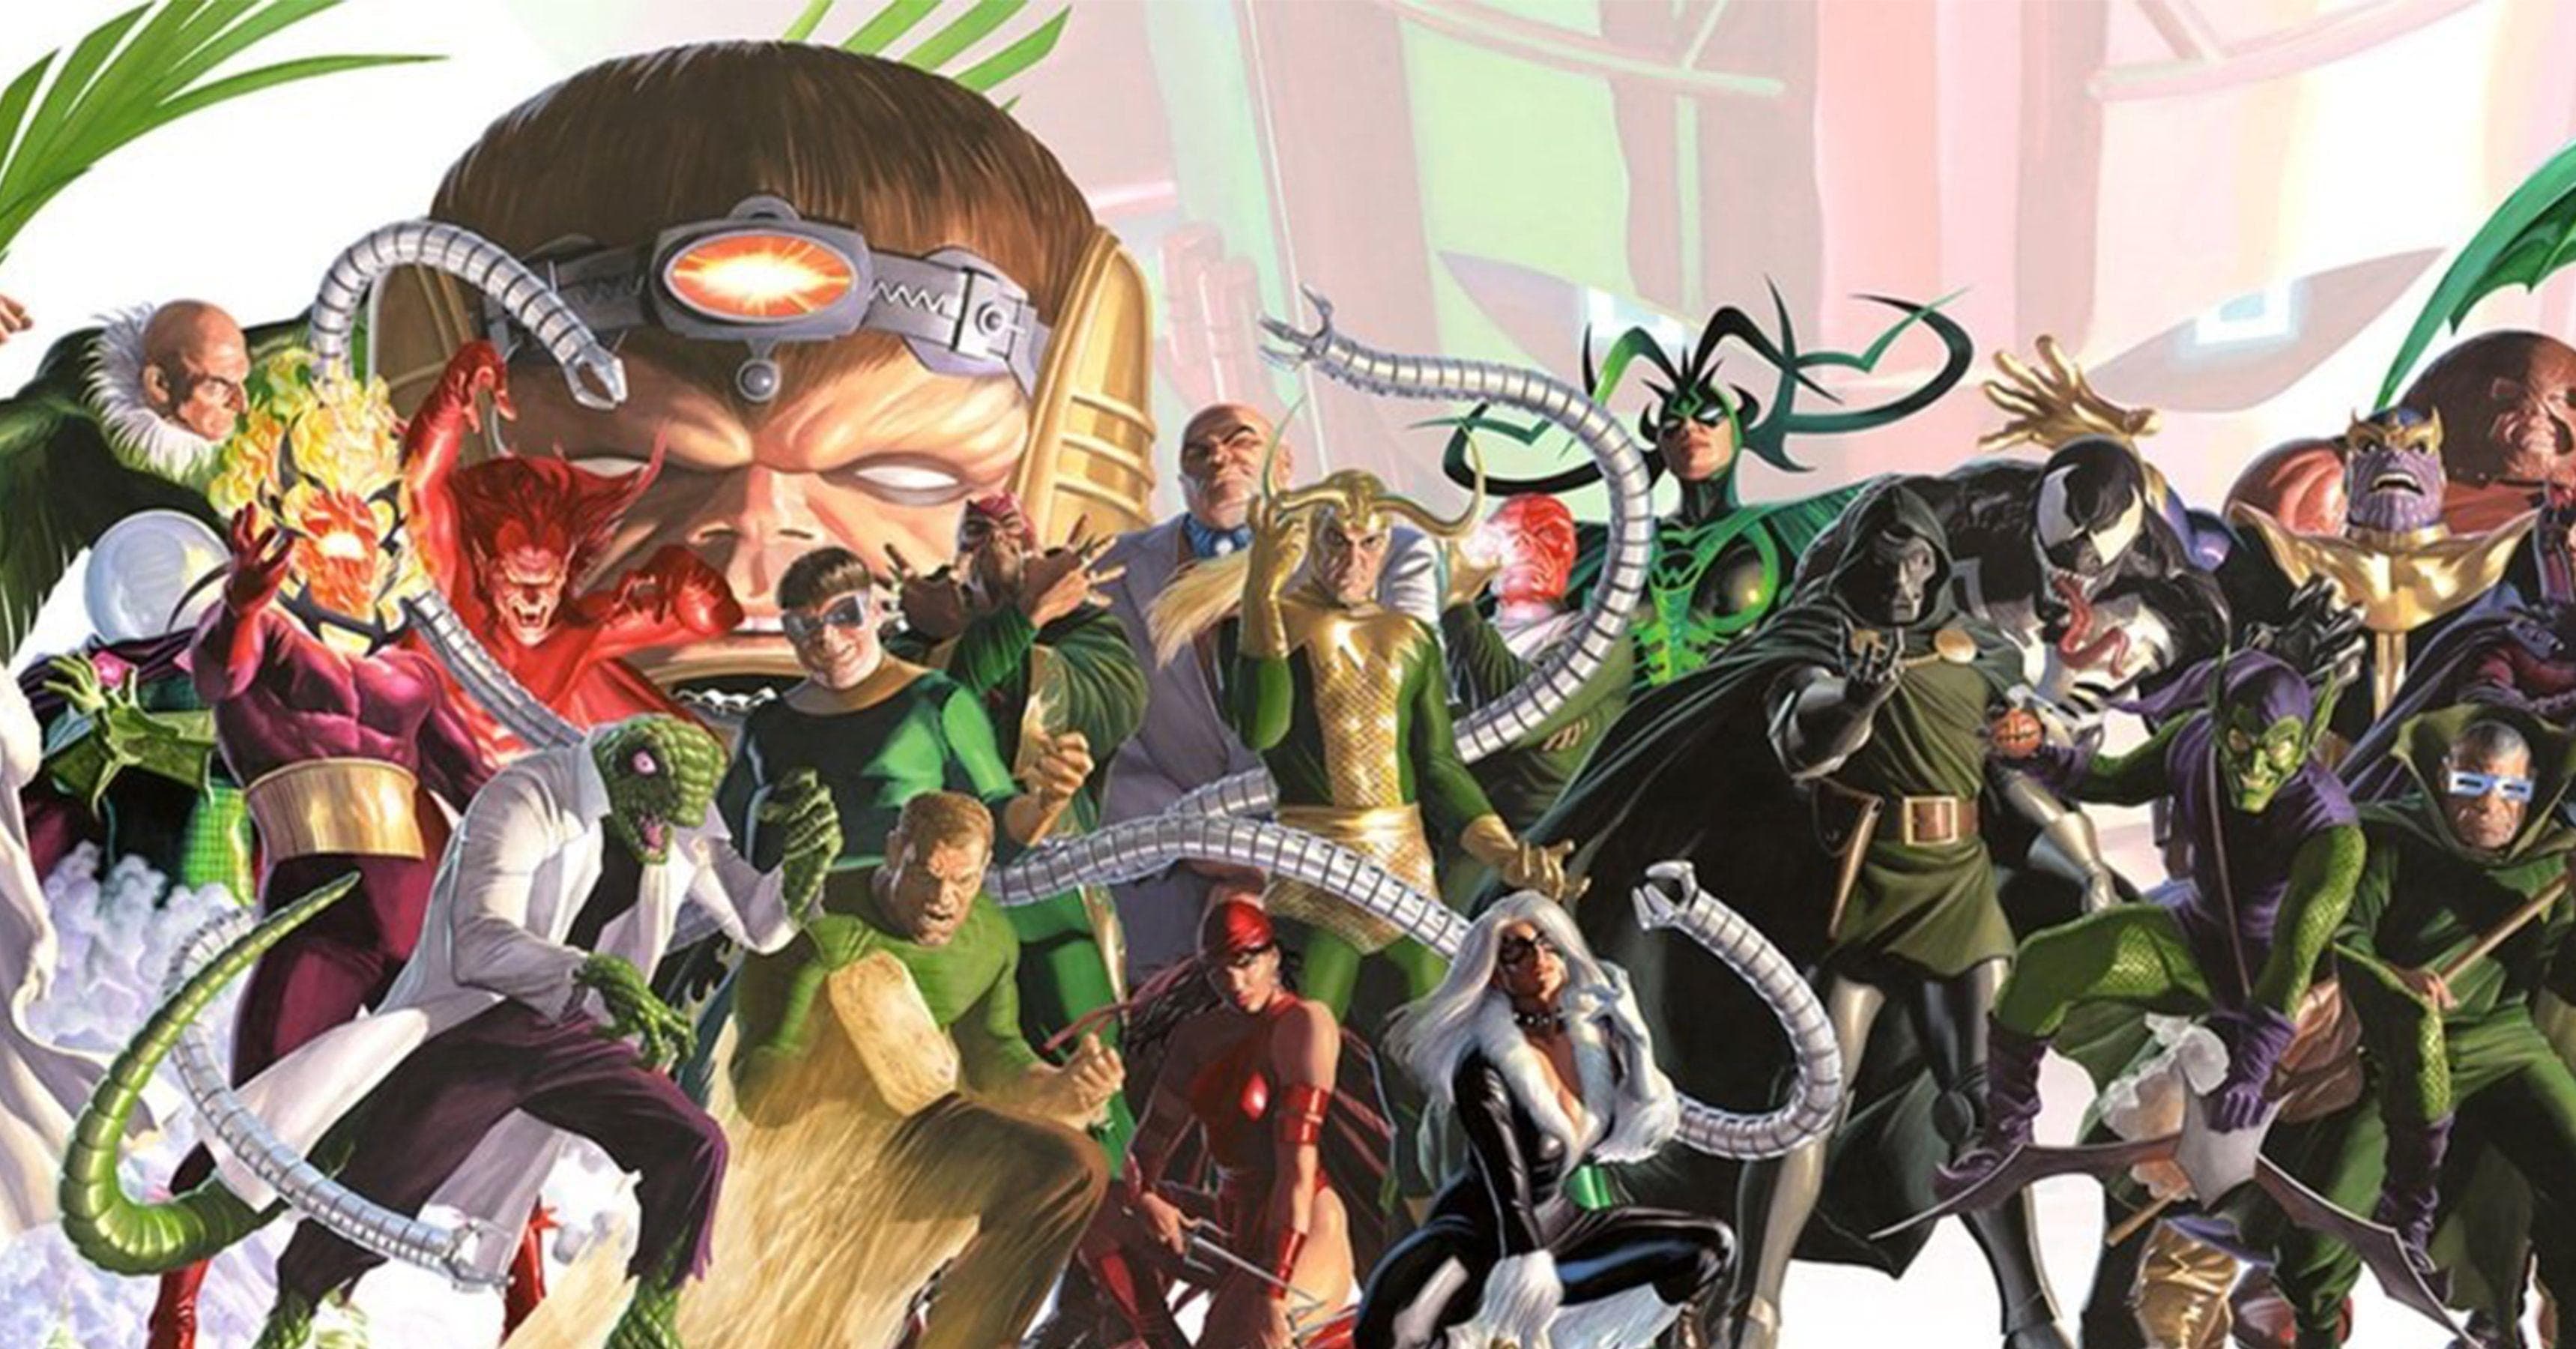 Meet the Marvels - All of the Marvel heroes (and villains) of Marvel Comics